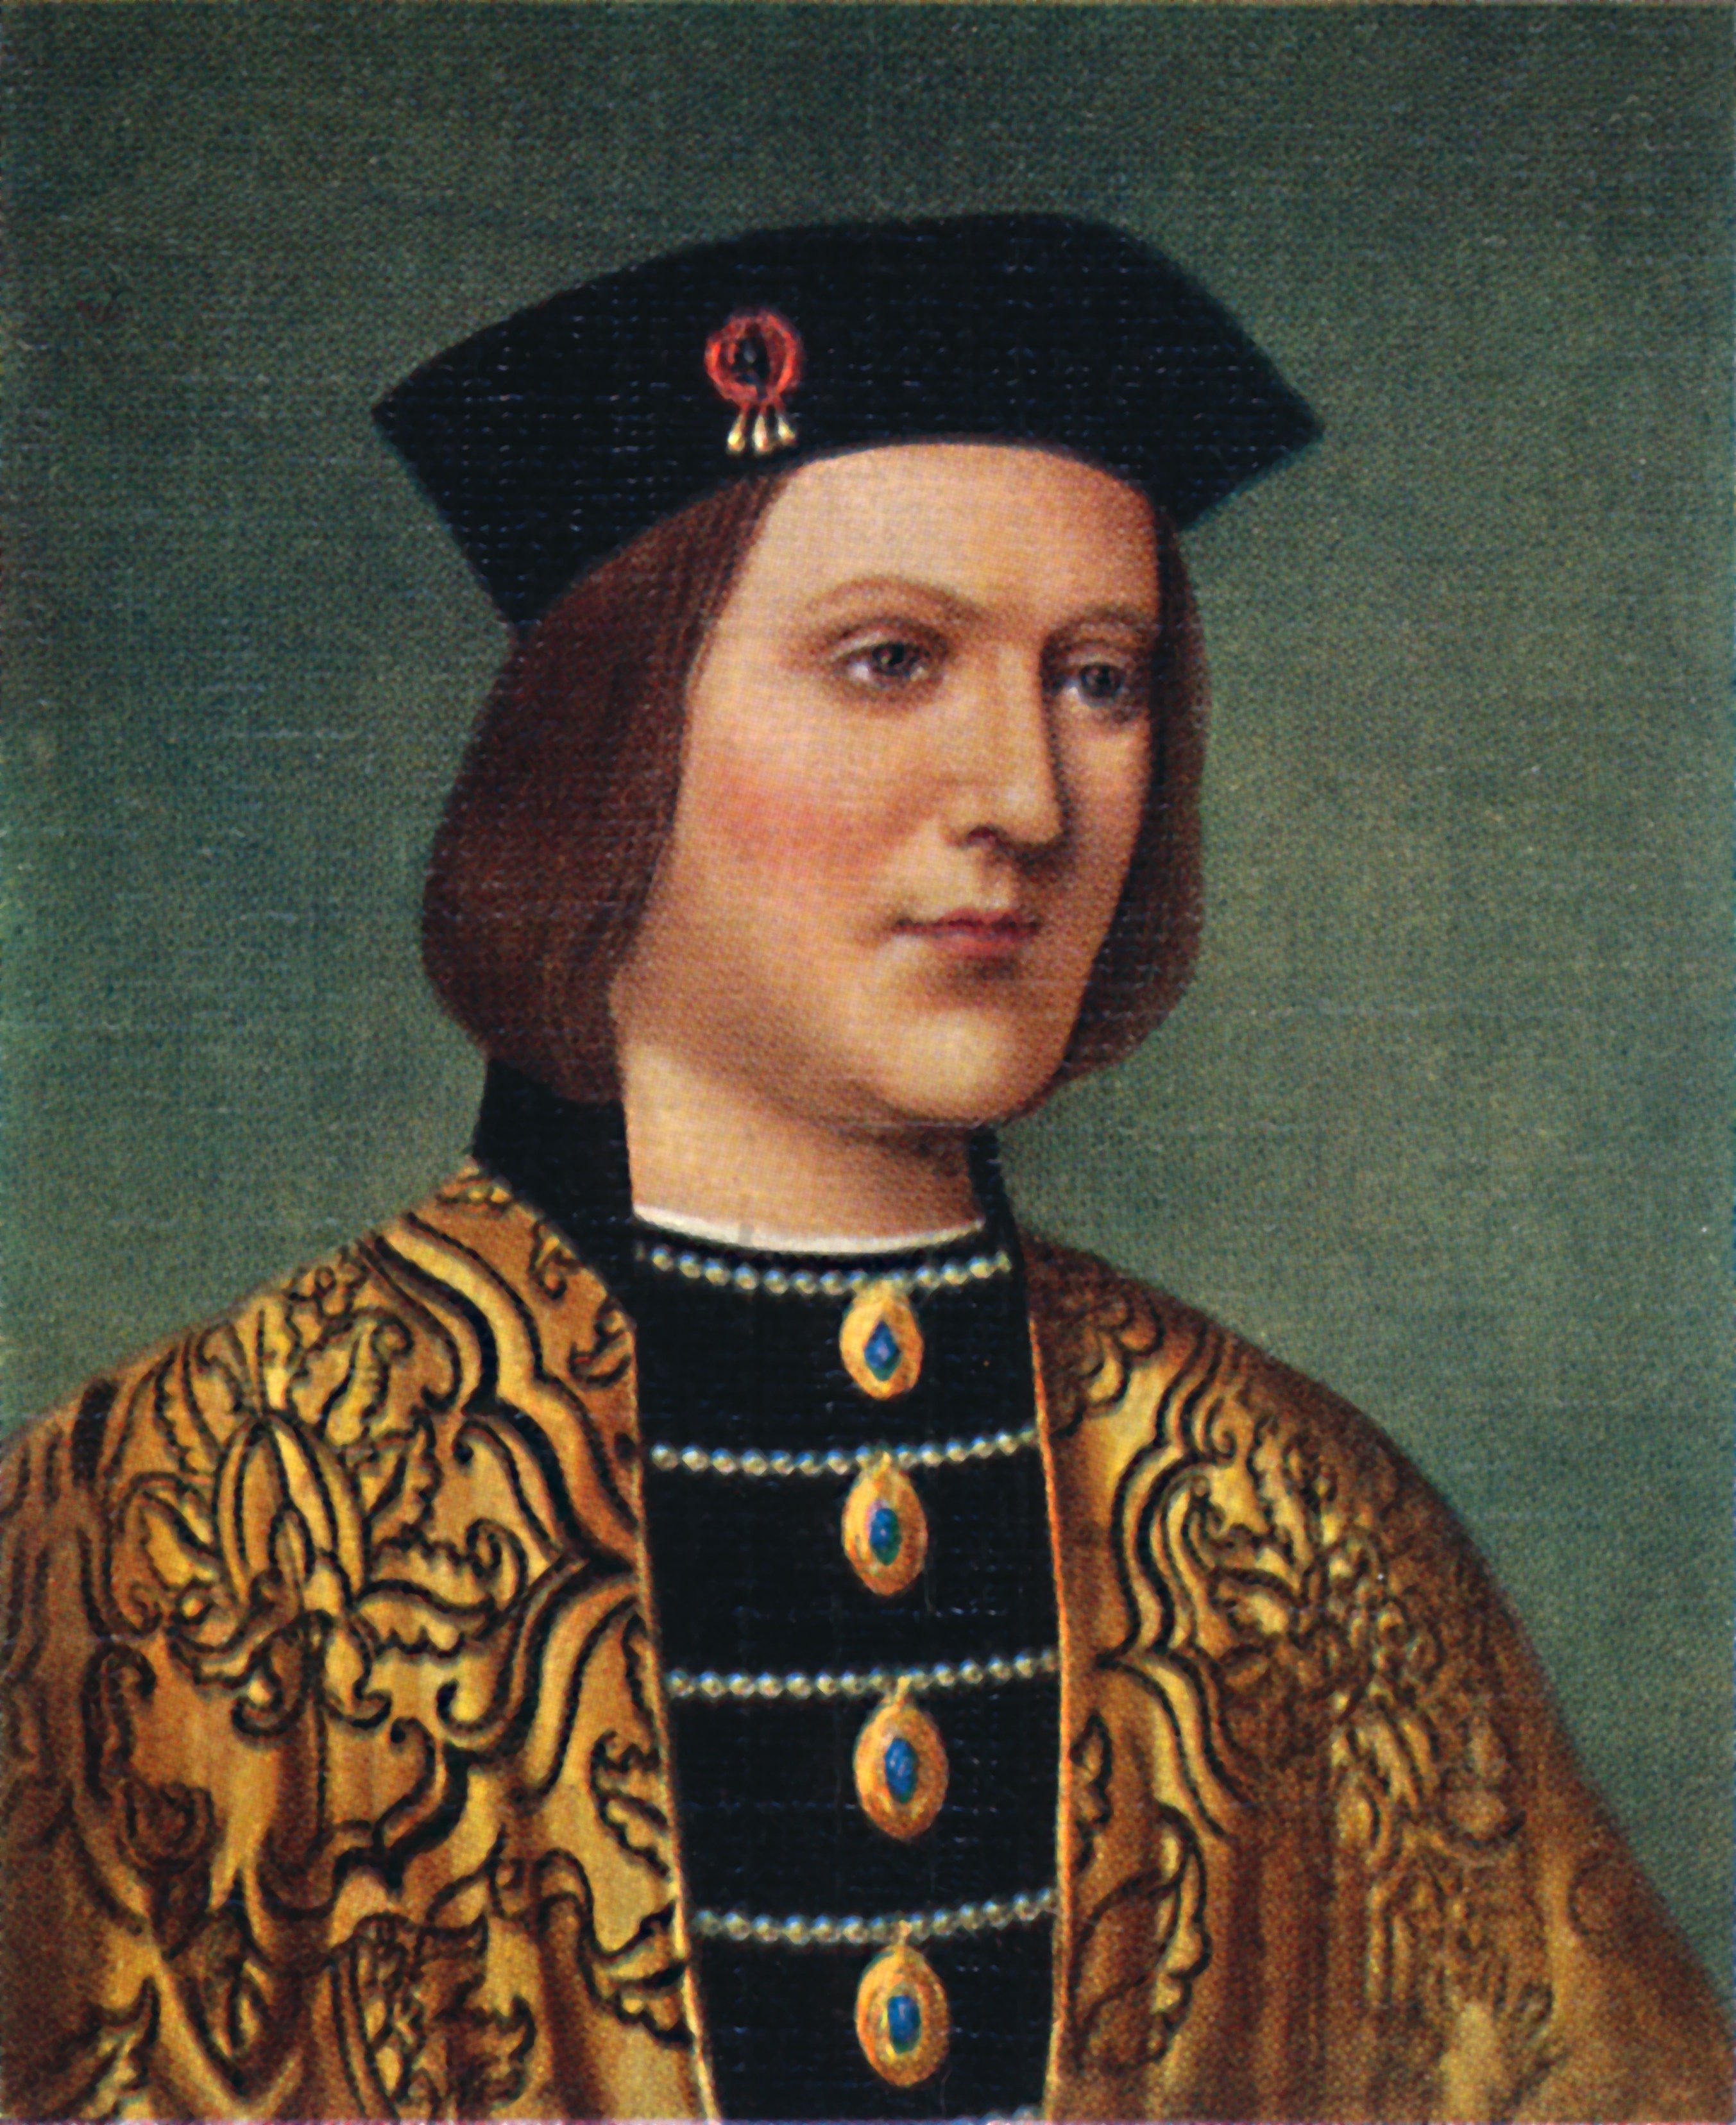 King Edward IV who ruled England from March 4, 1461 to April 9, 1483, and ascended the throne again in 1470-1471. / Source: Getty Images